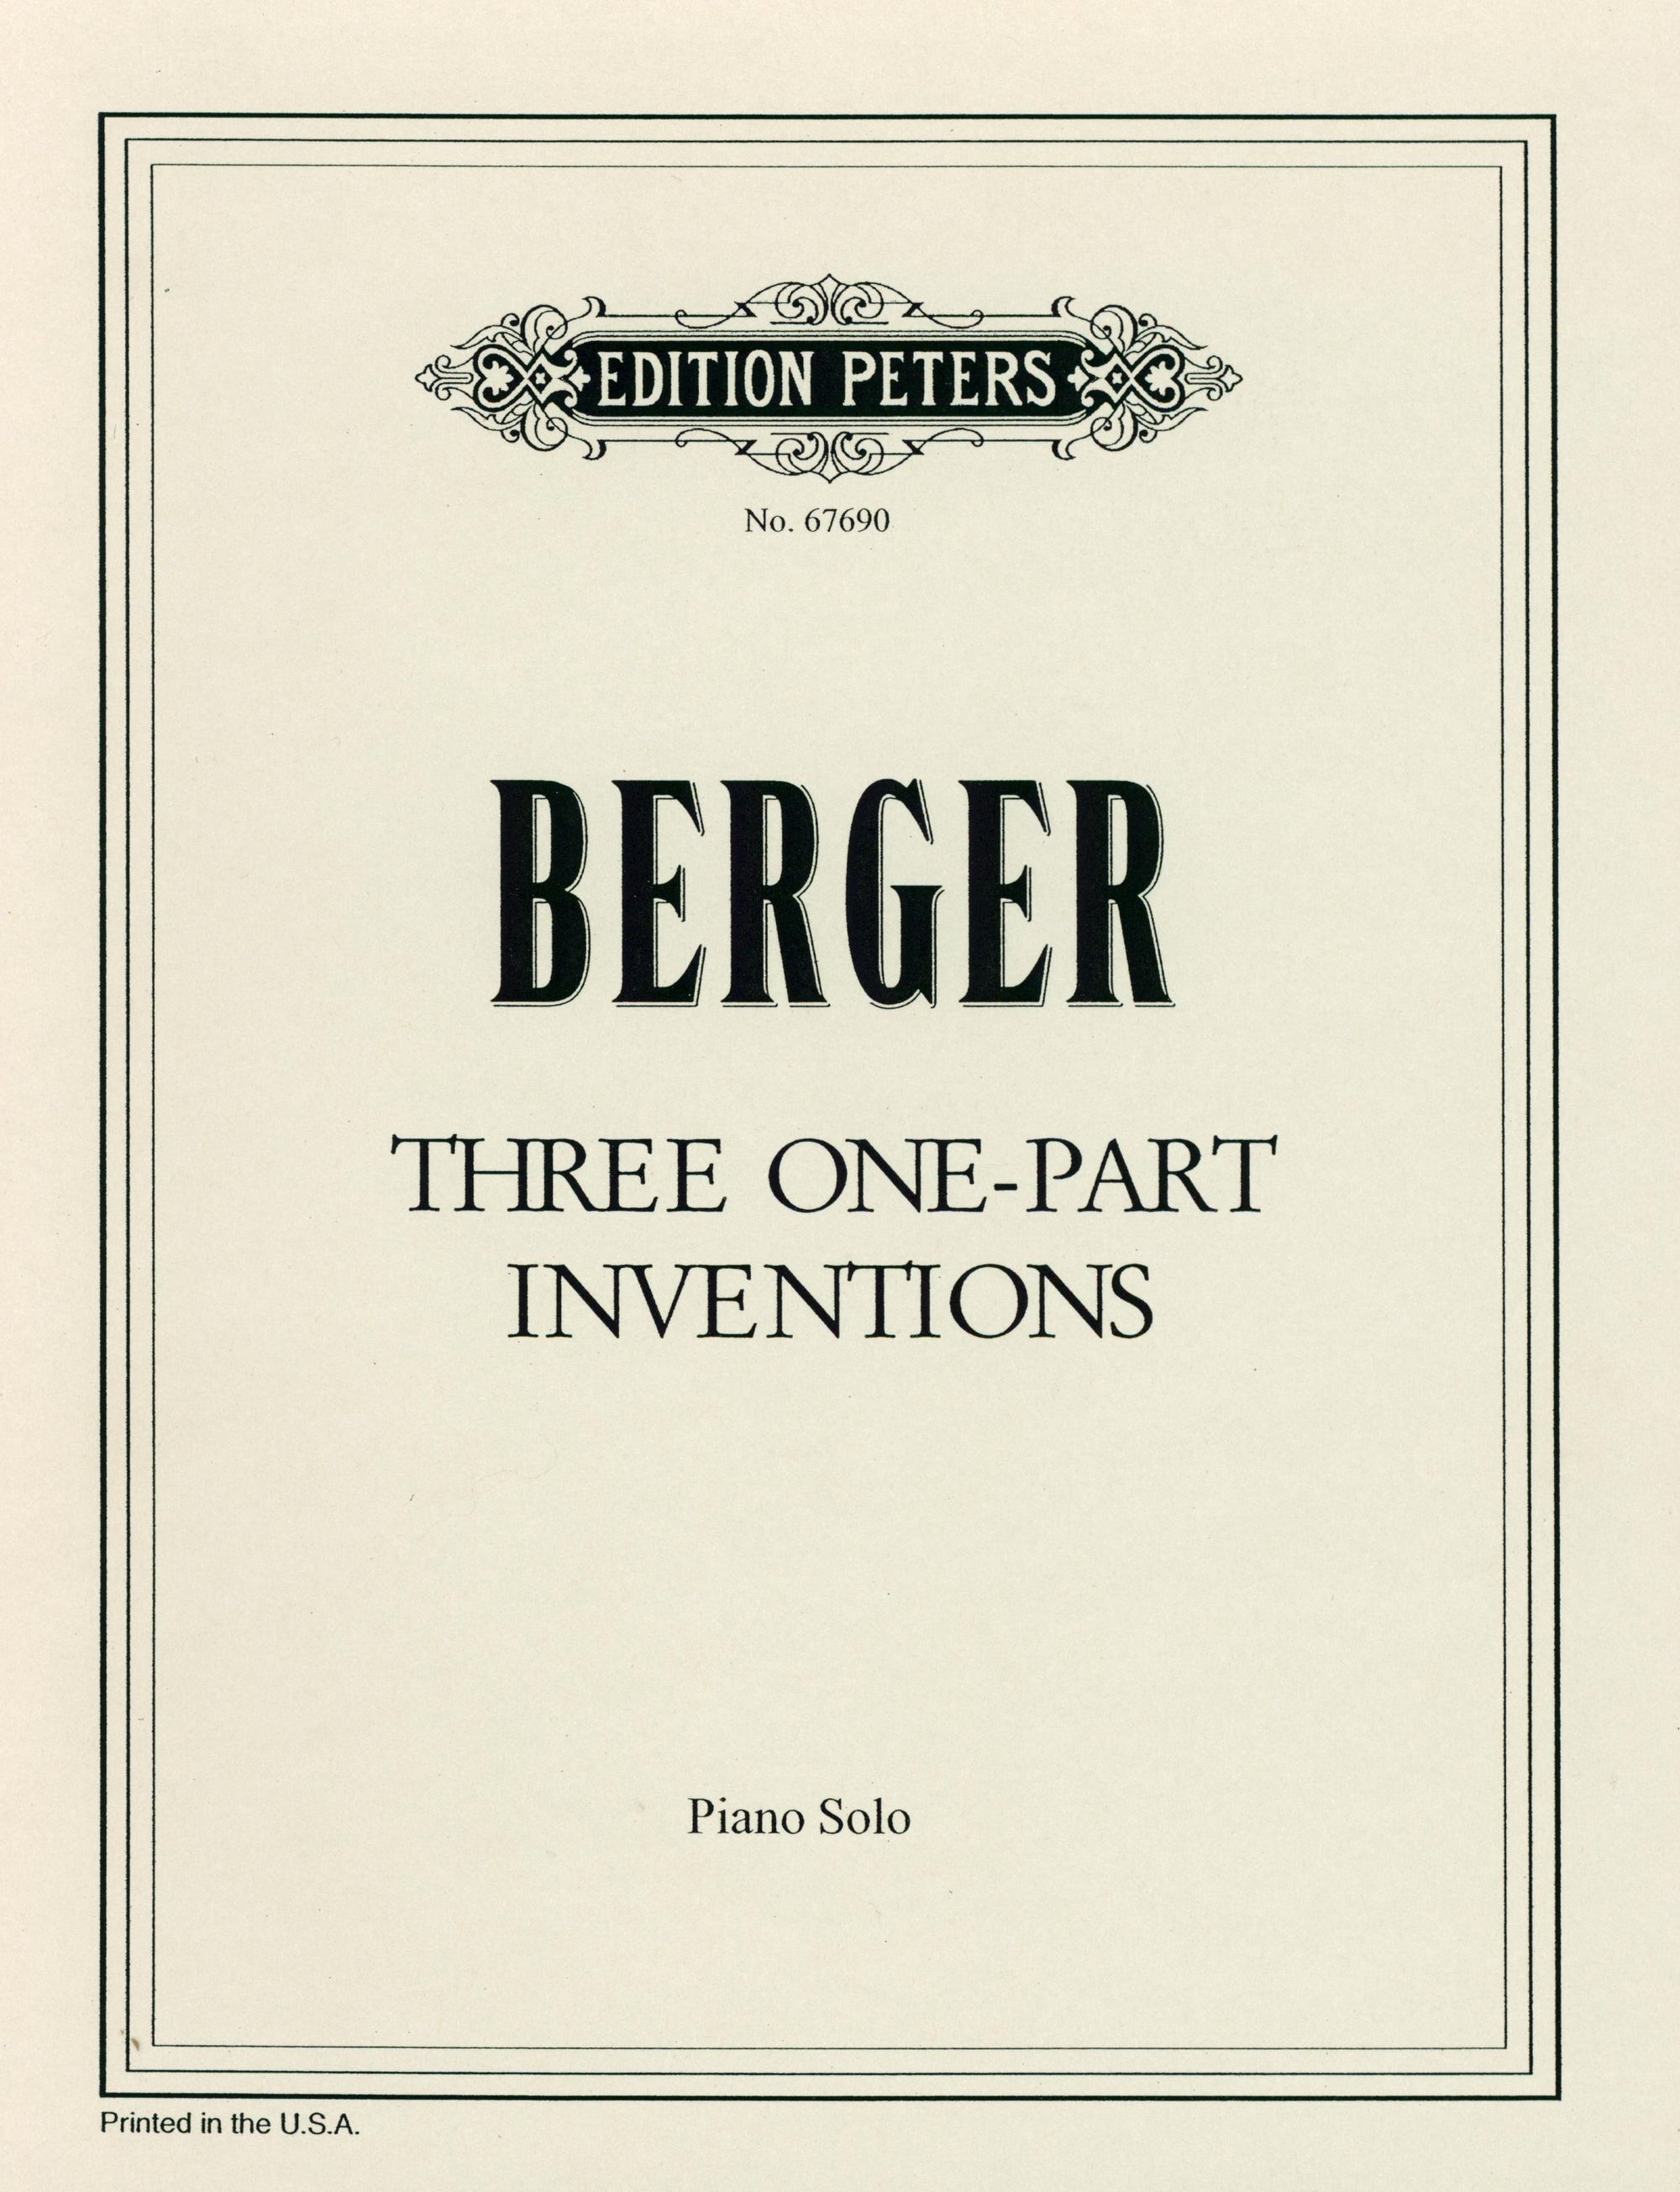 Berger: 3 One-Part Inventions